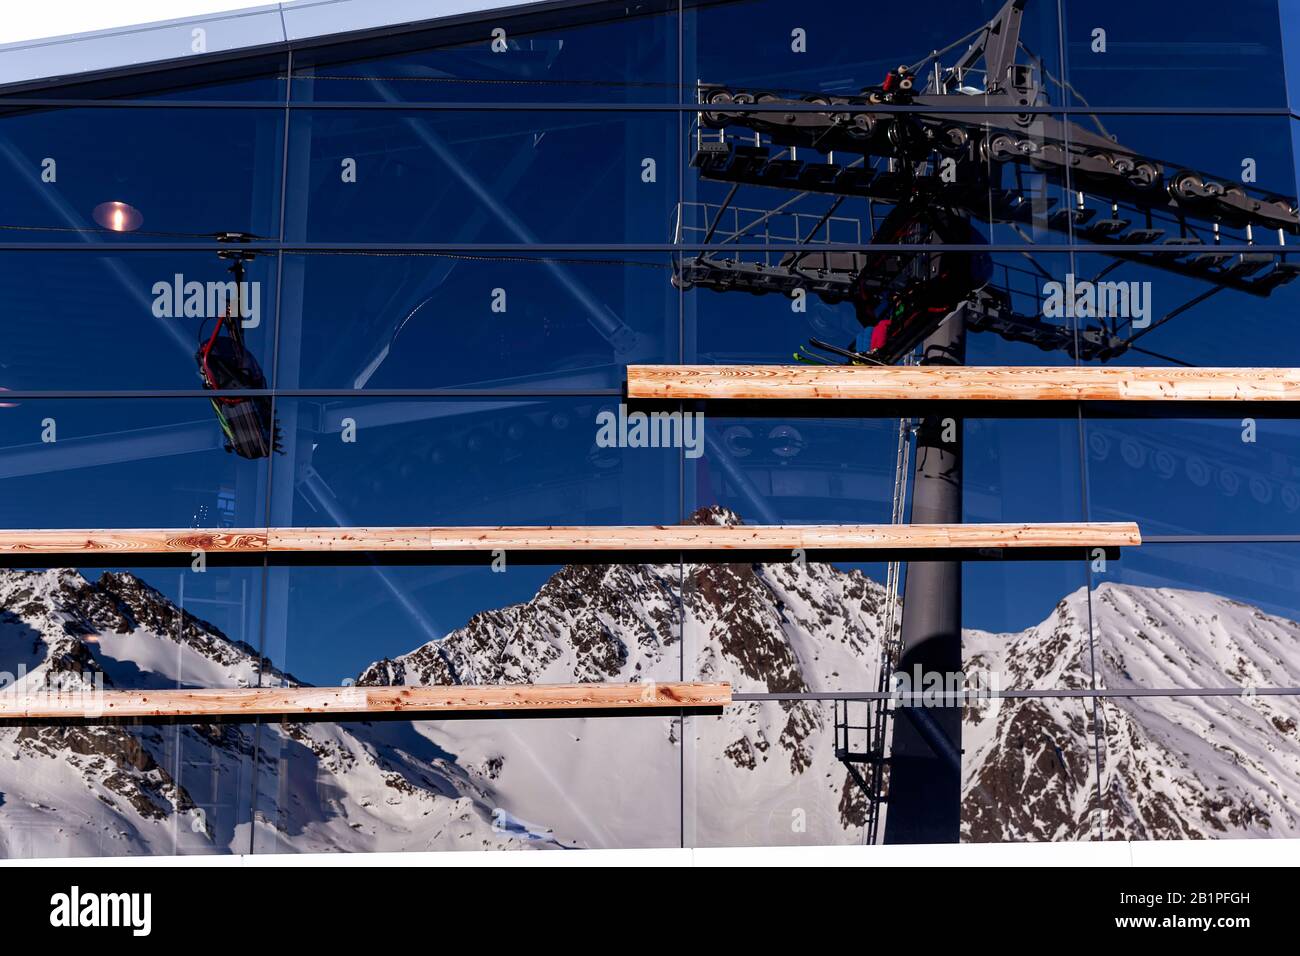 Ischgl, Austria - January 2020: reflection of mountains and cable car in the panoramic windows of the Pardorama restaurant in the ski resort of Ischgl Stock Photo